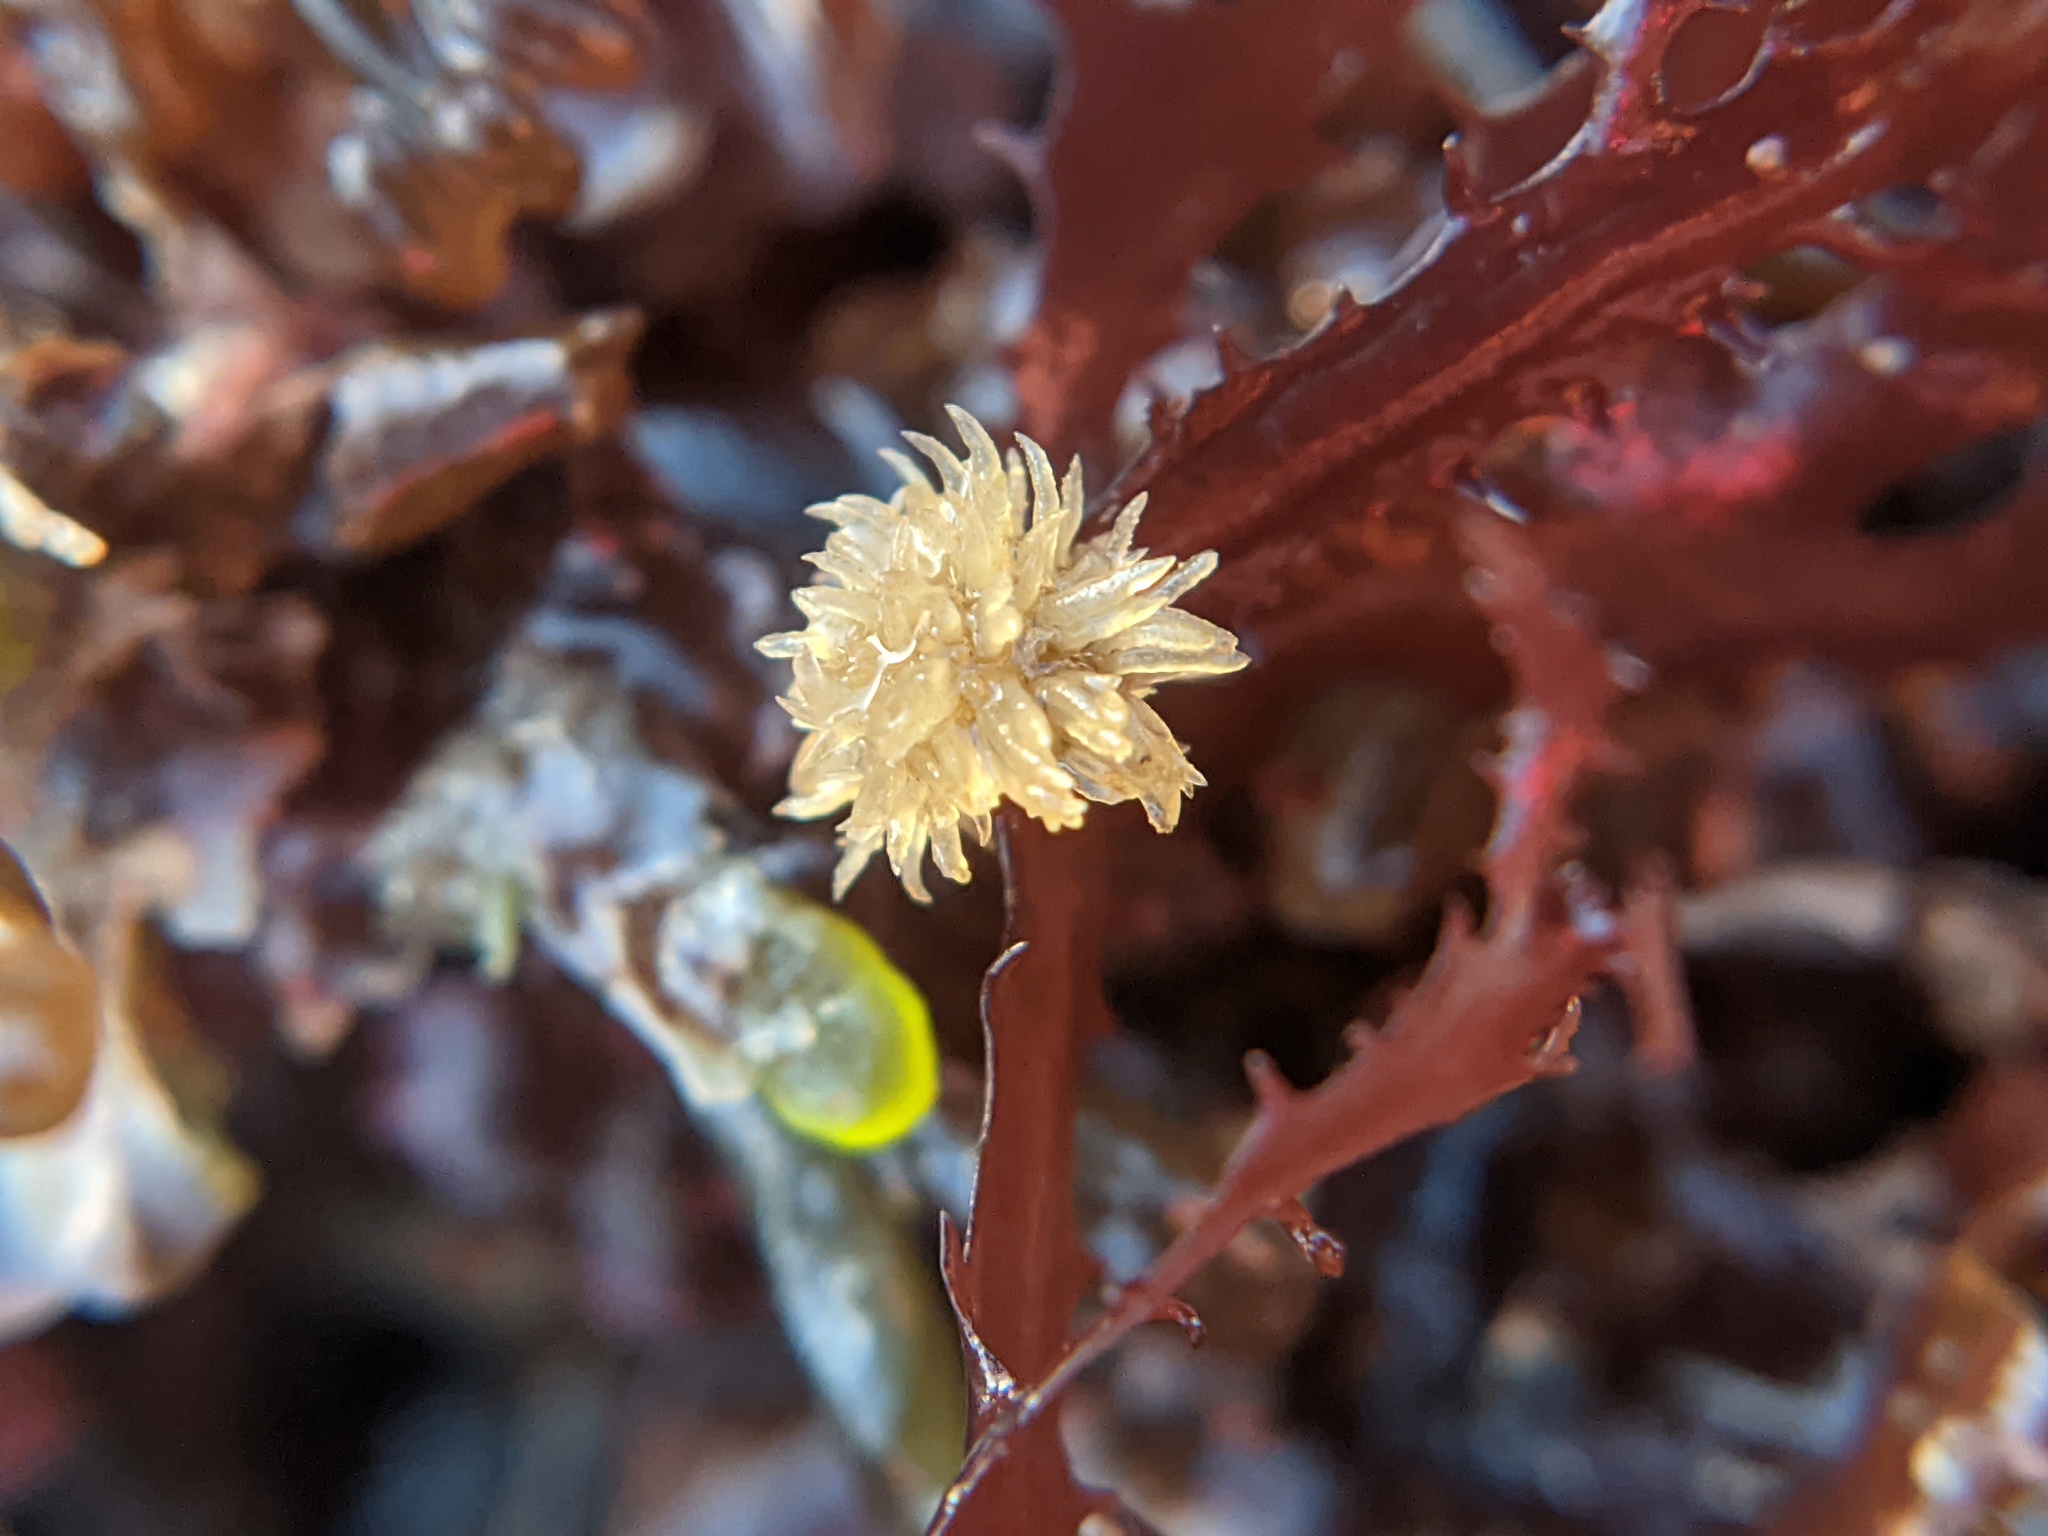 A small, stellate, pale alga grows attached to a larger dark red alga